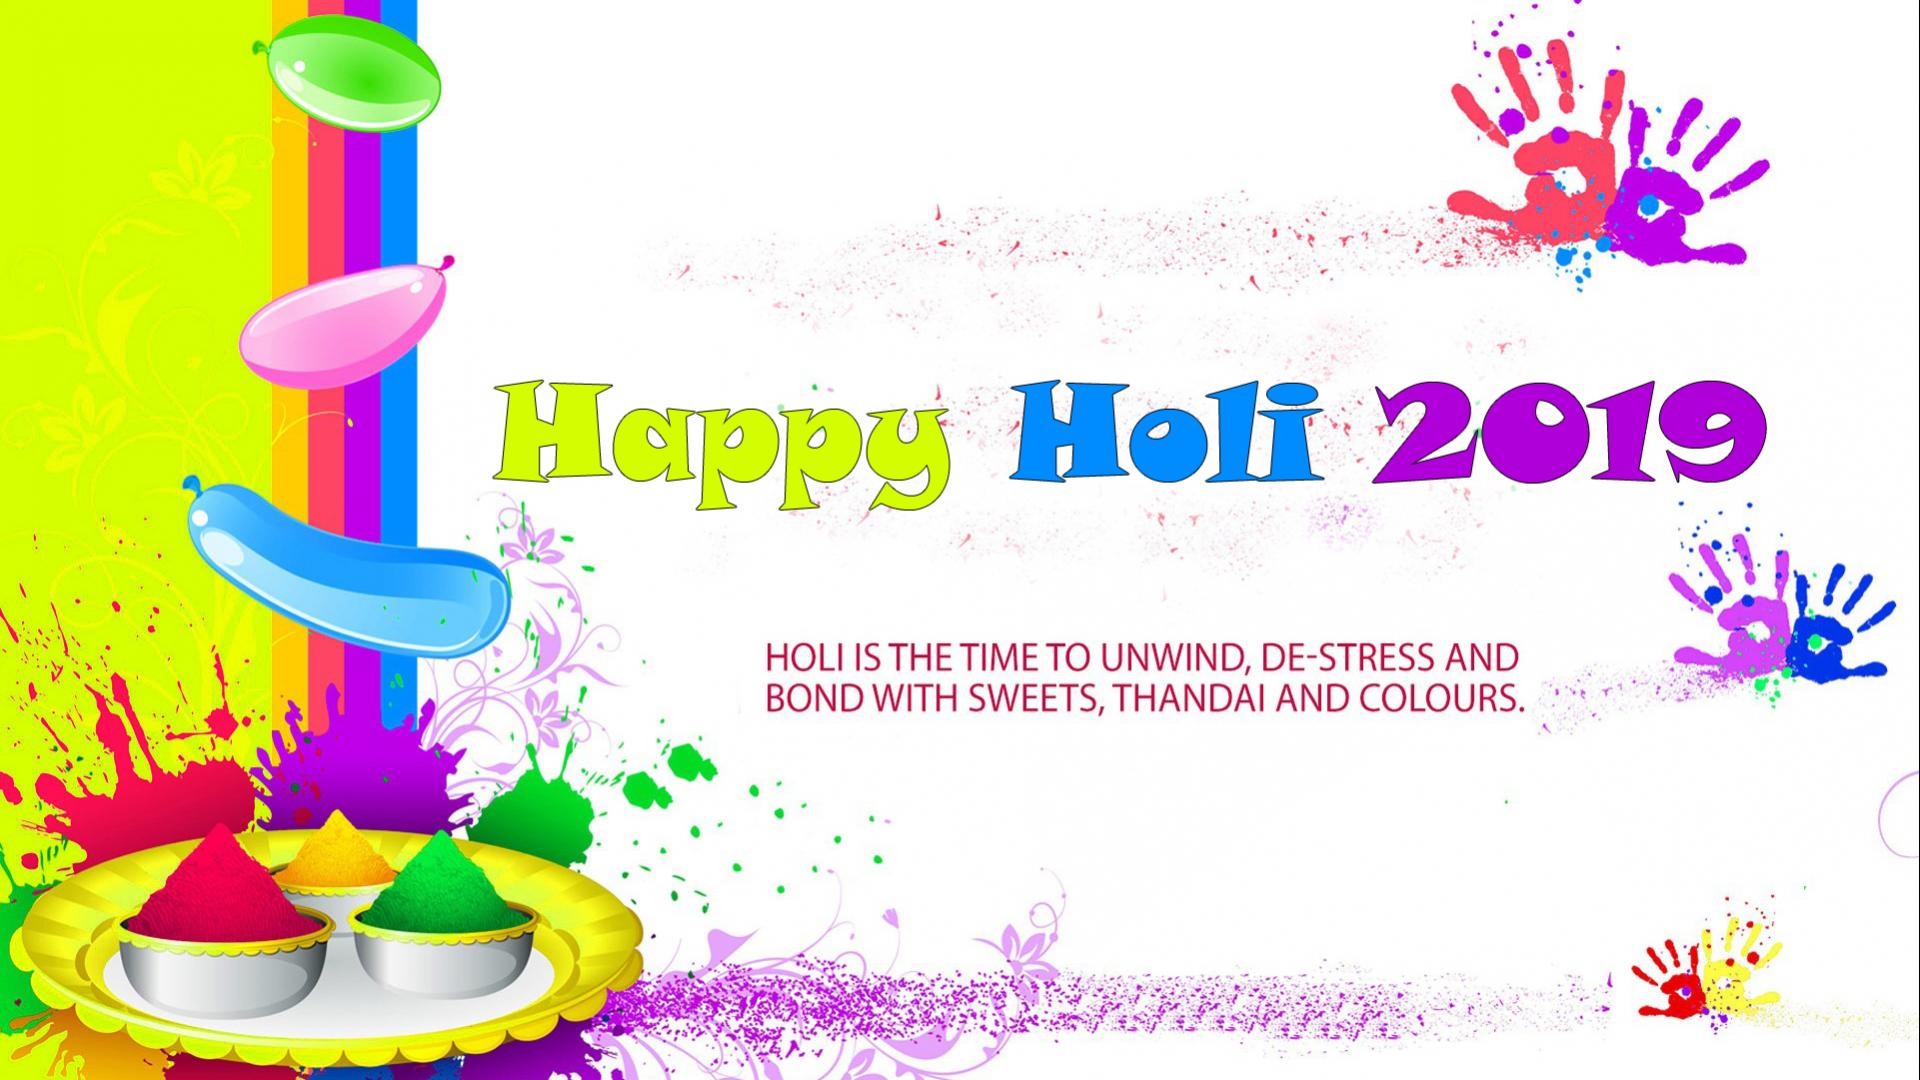 New Wallpaper For Happy Holi 2019 In Hd Source - Holi 2019 Images Download , HD Wallpaper & Backgrounds